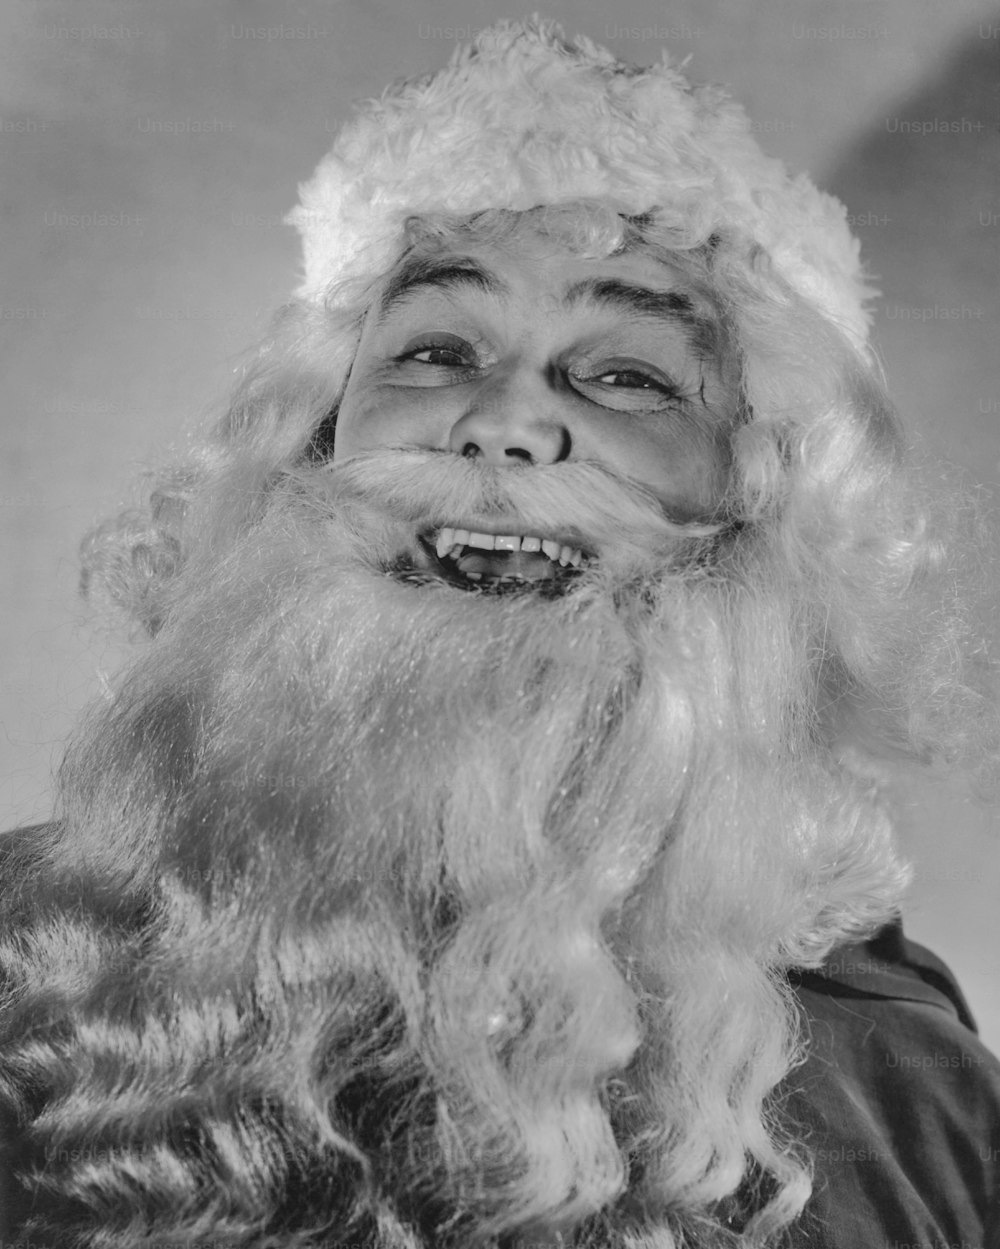 Santa Claus laughing in 1935. (Photo by Keystone View/FPG/Getty Images)